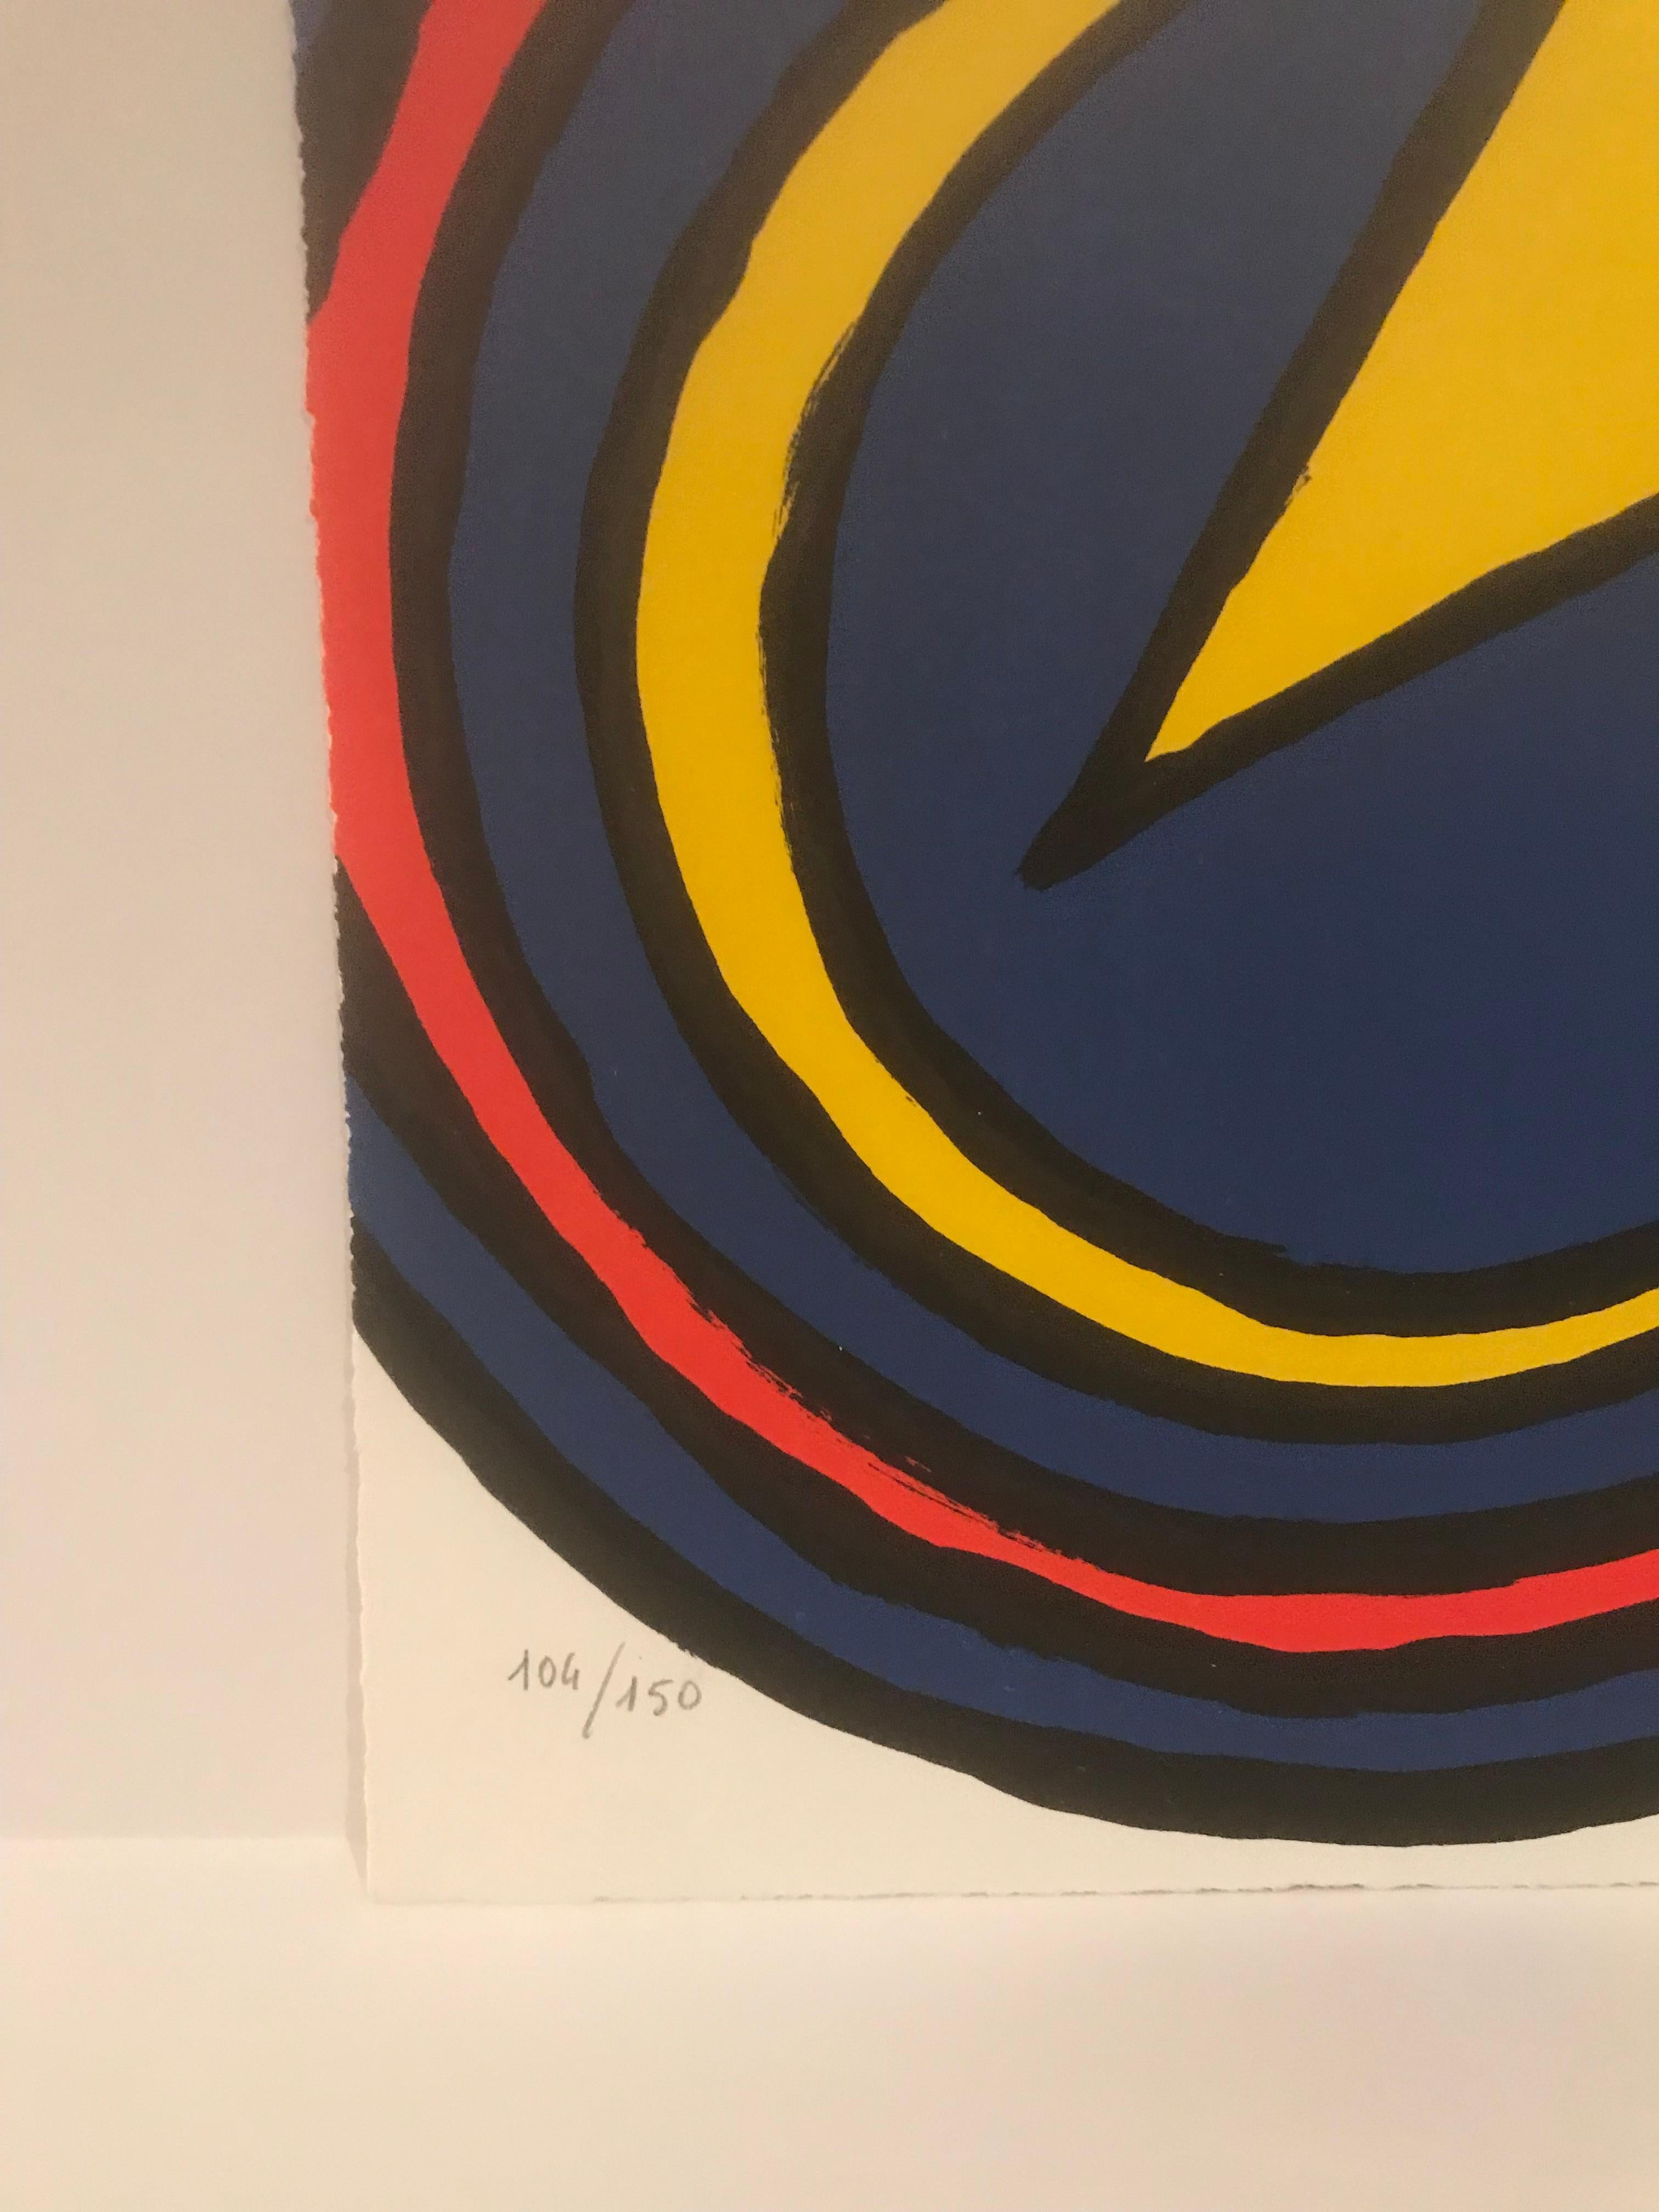 TECHNICAL INFORMATION

Alexander Calder
Untitled		
Lithograph	
26 x 19 in.	
Edition of 150	
Pencil signed & numbered

Accompanied with COA by Gregg Shienbaum Fine Art 

Condition: This work is in excellent condition.